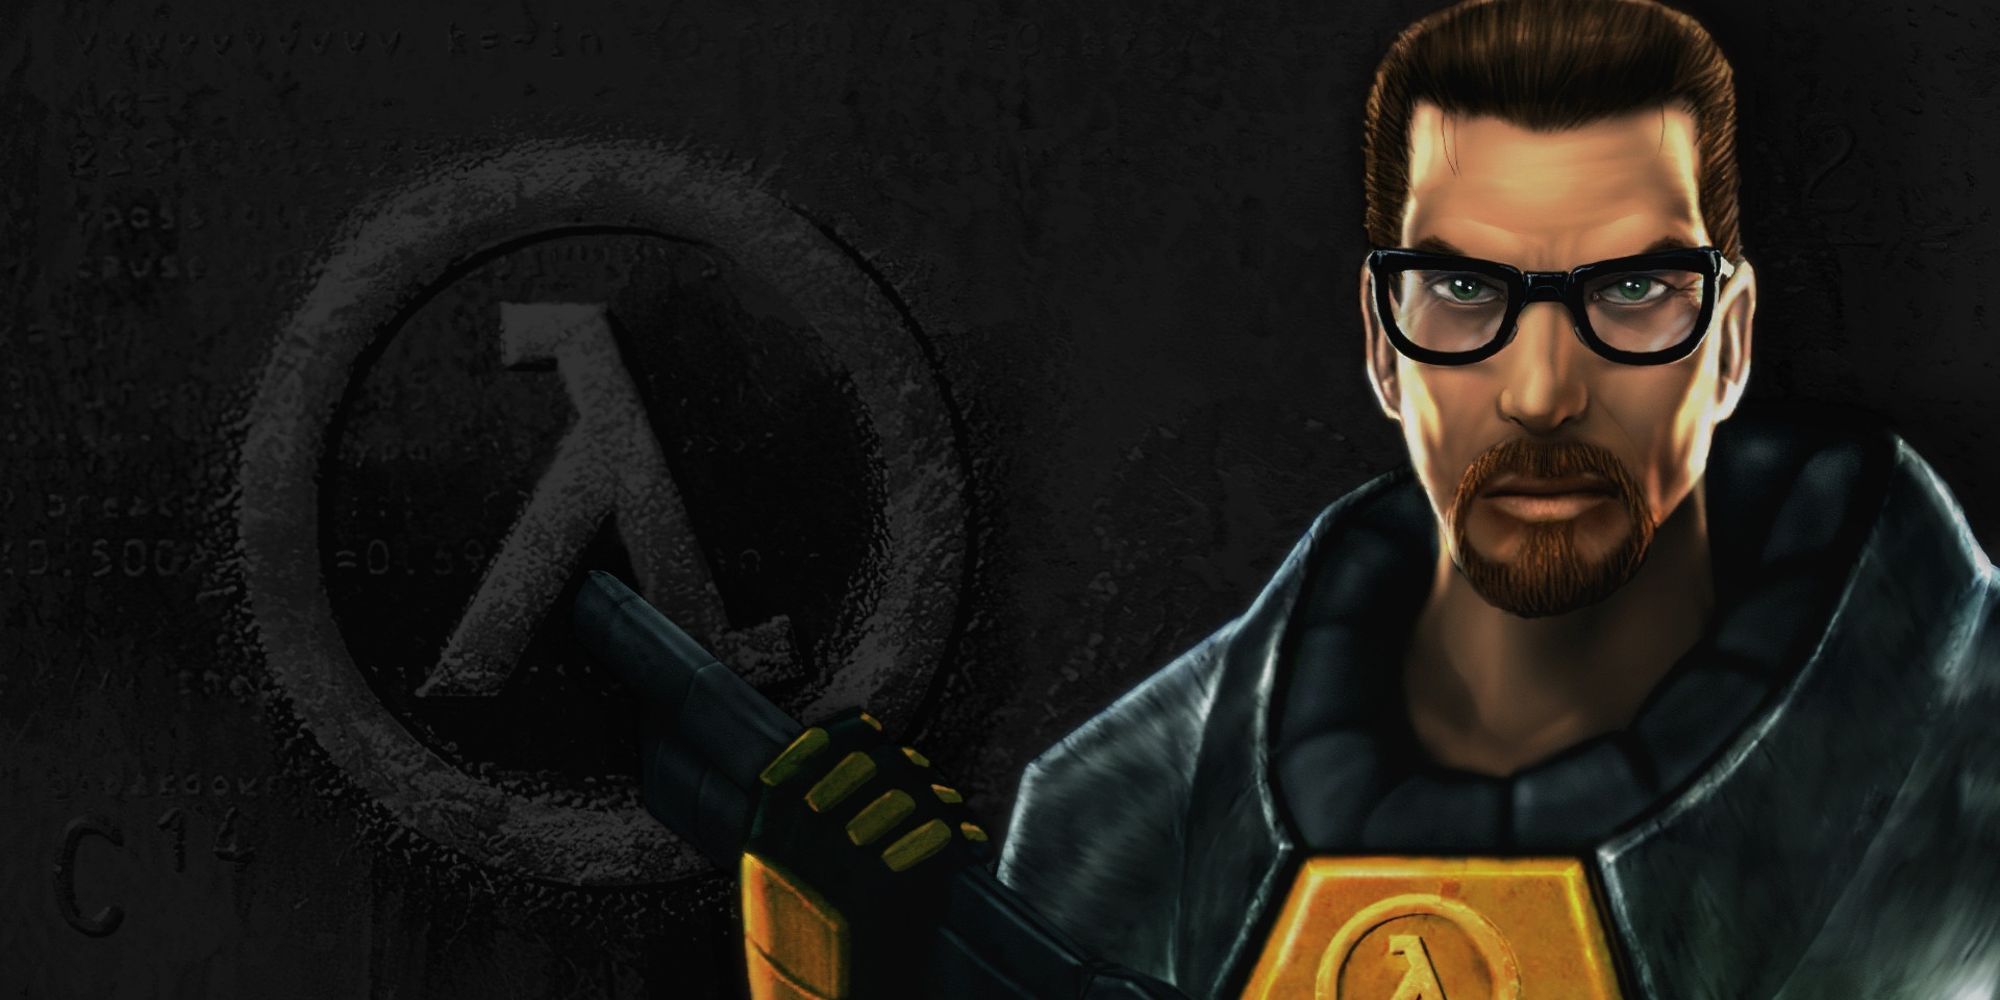 poster for Half-Life one featuring the main character Gordon Freeman with a gun and the iconic logo